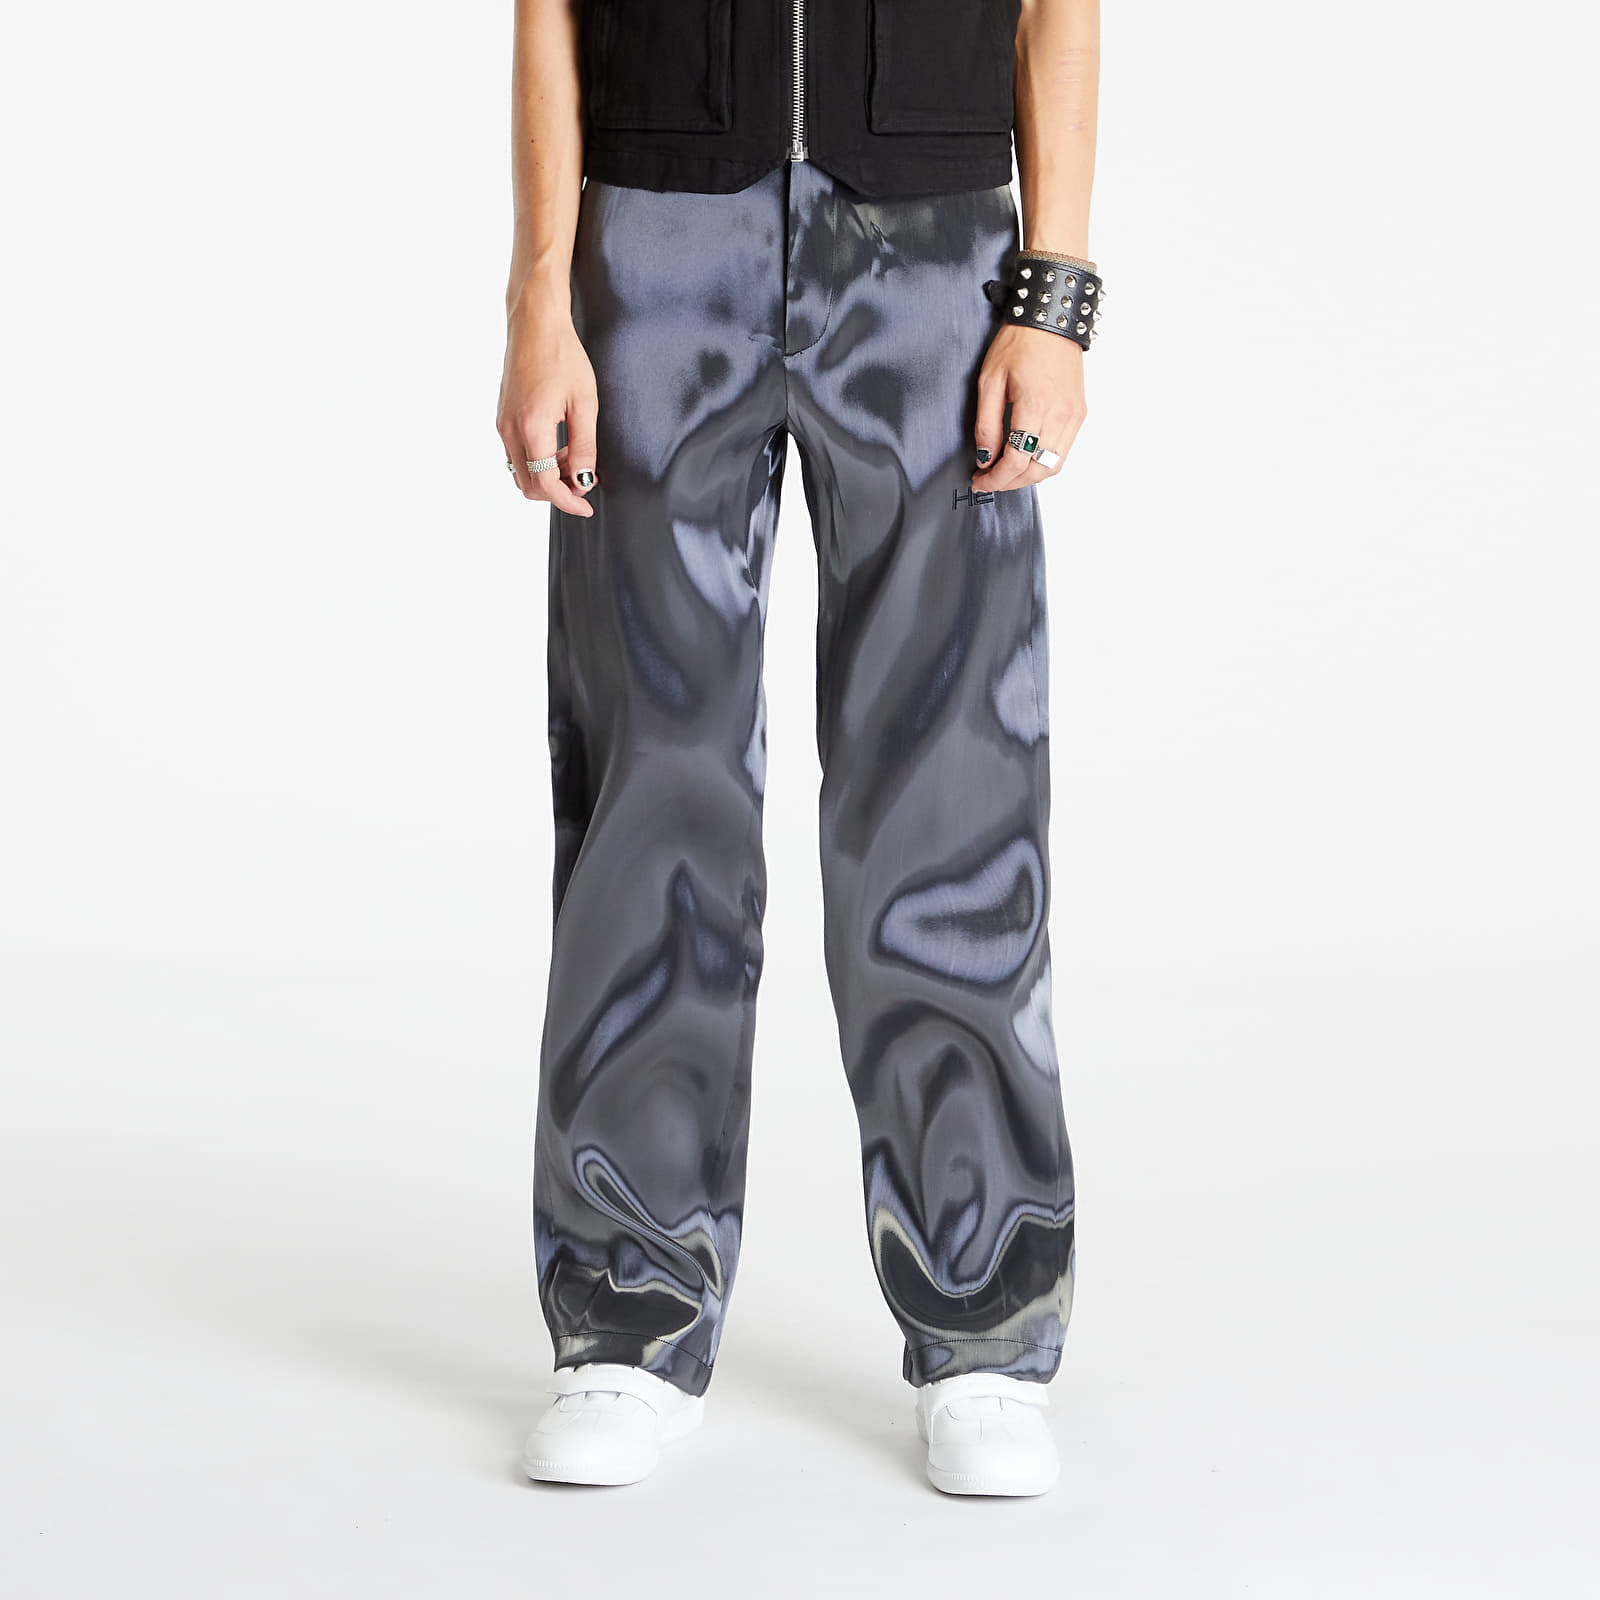 Fashion, design, and art, Throwback to Heliot Emil's Liquid Metal  trousers, still one of the most creative pants I've seen in a while.  Curious your thoughts if